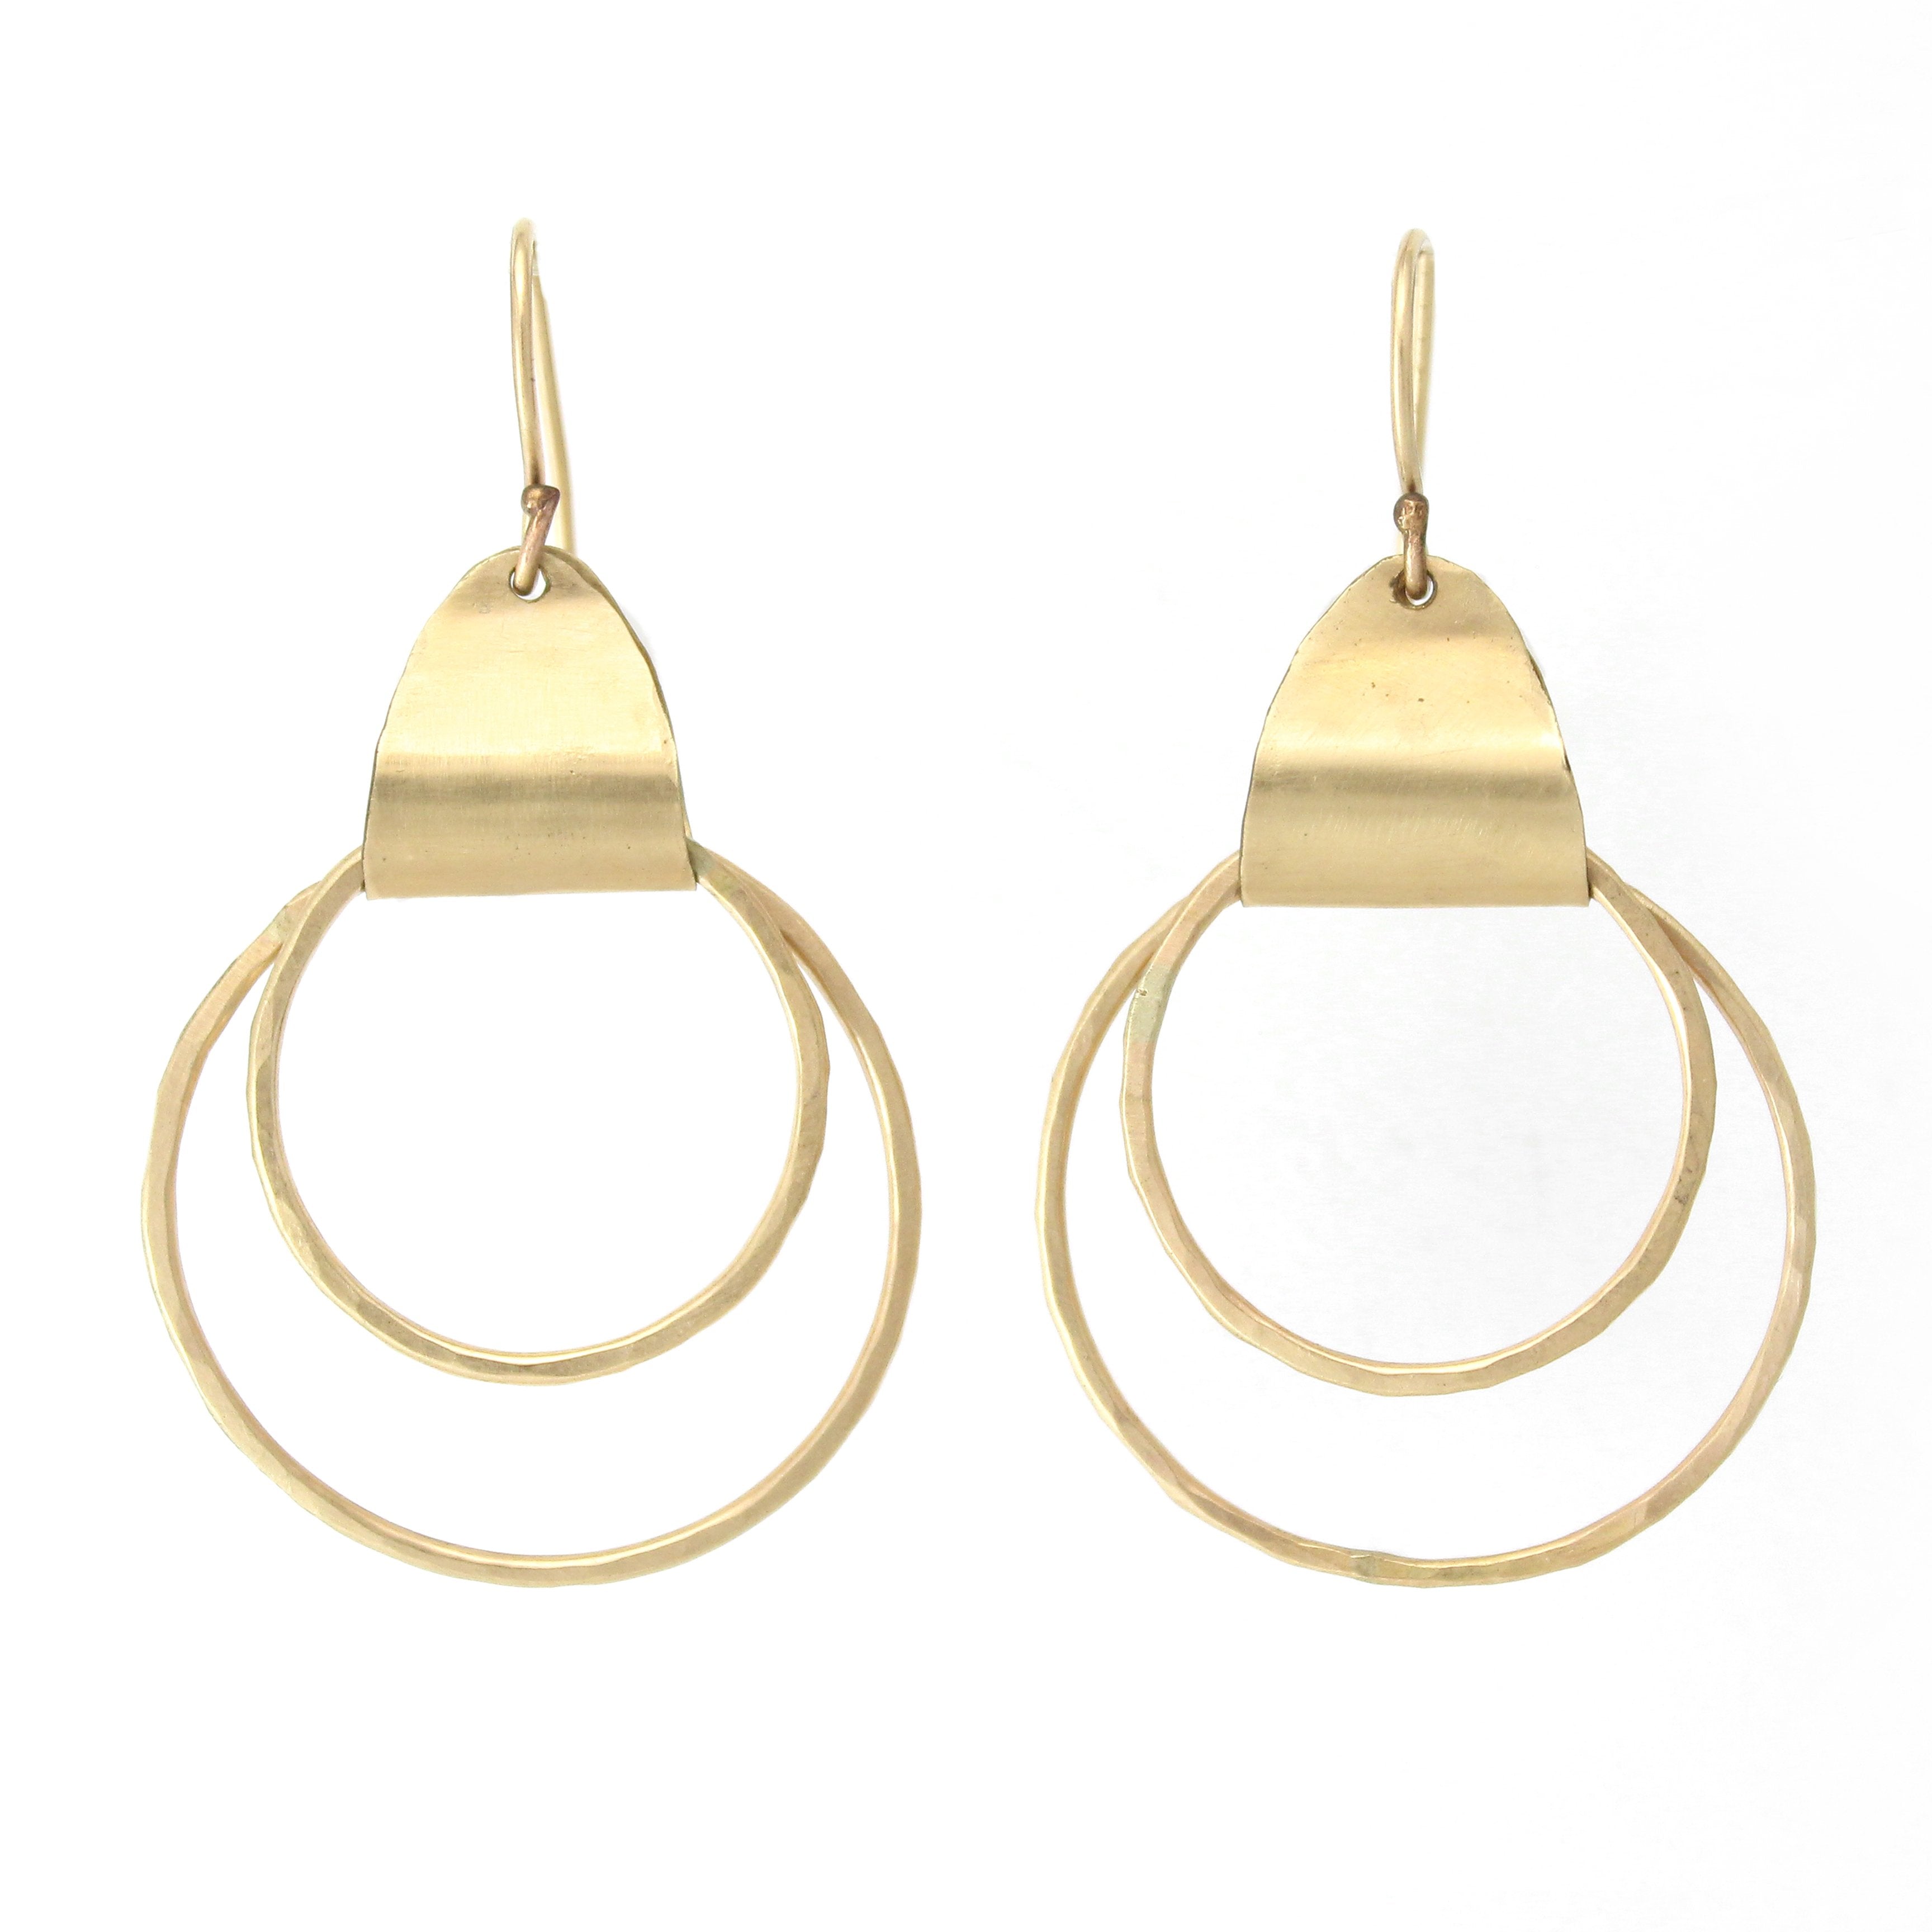 Ancient Egyptian Earrings (Gold filled/Silver) - Shulamit Kanter